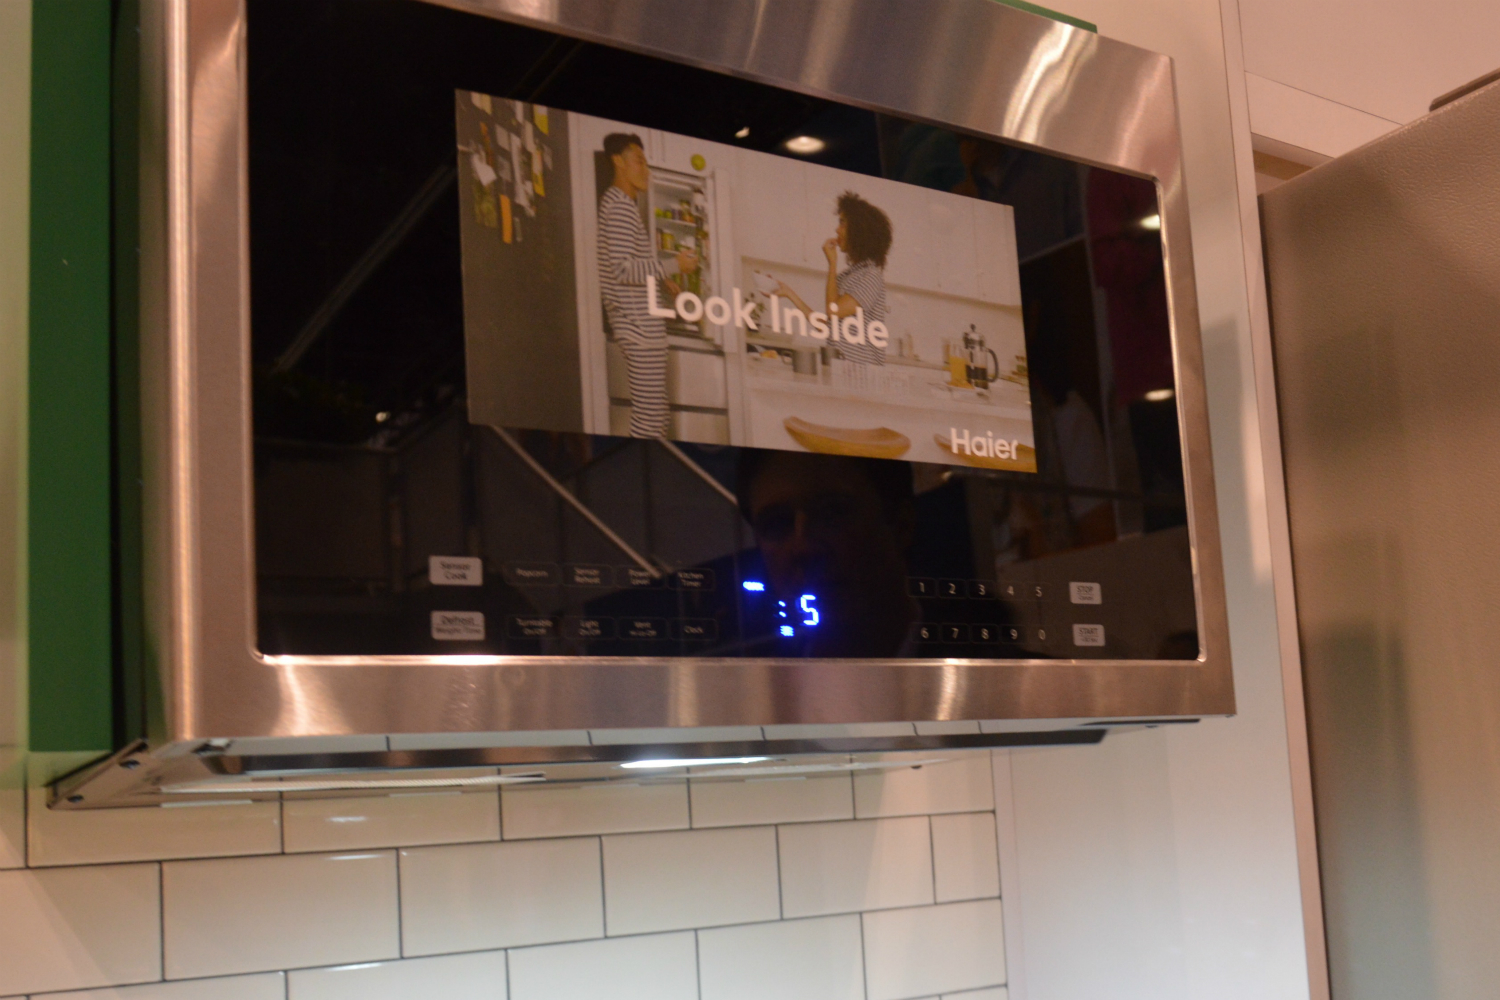 appliance trends kbis 2017 haier 24 inch microwave